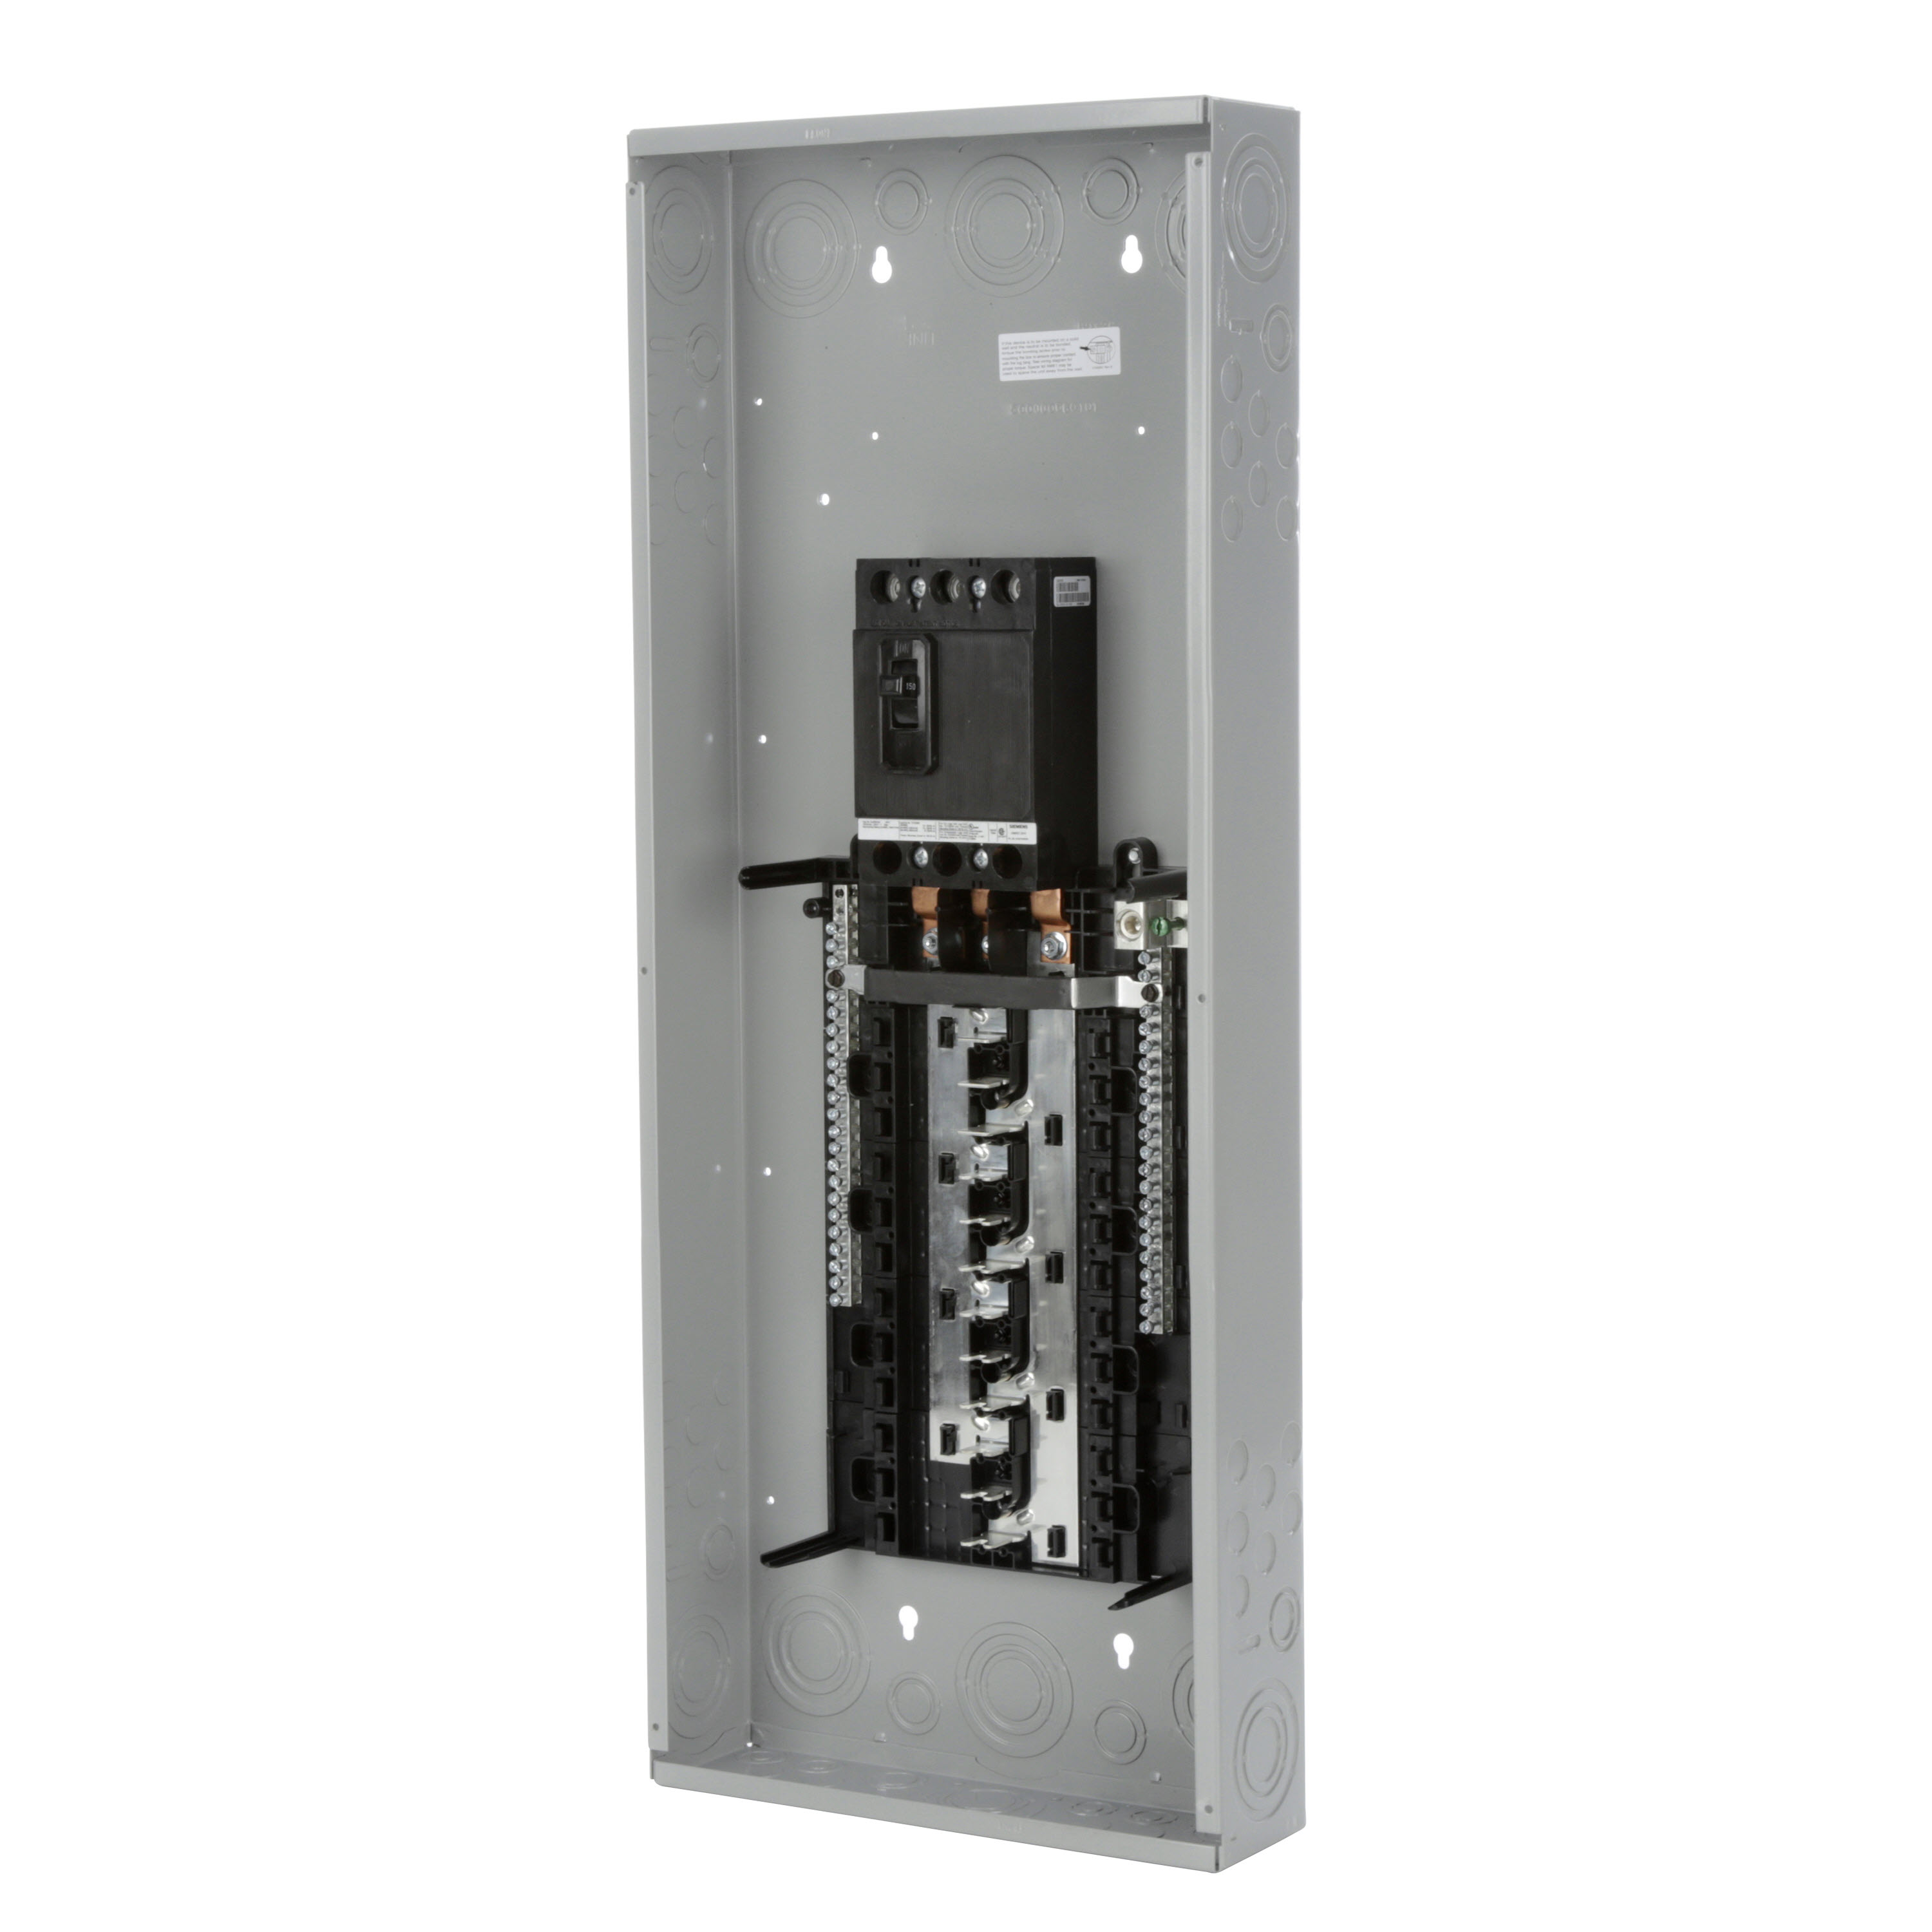 SIEMENS LOW VOLTAGE ES SERIES LOAD CENTER. FACTORY INSTALLED MAIN BREAKER WITH 24 1-INCH SPACES ALLOWING MAX 42 CIRCUITS. 3-PHASE 4-WIRE SYSTEM RATED 120/240V OR 120/208V (150A) 10KA INTERRUPT. SPECIAL FEATURES ALUMINUM BUS, GRAY TRIM, NEMA TYPE1 ENCLOSURE FOR INDOOR USE.